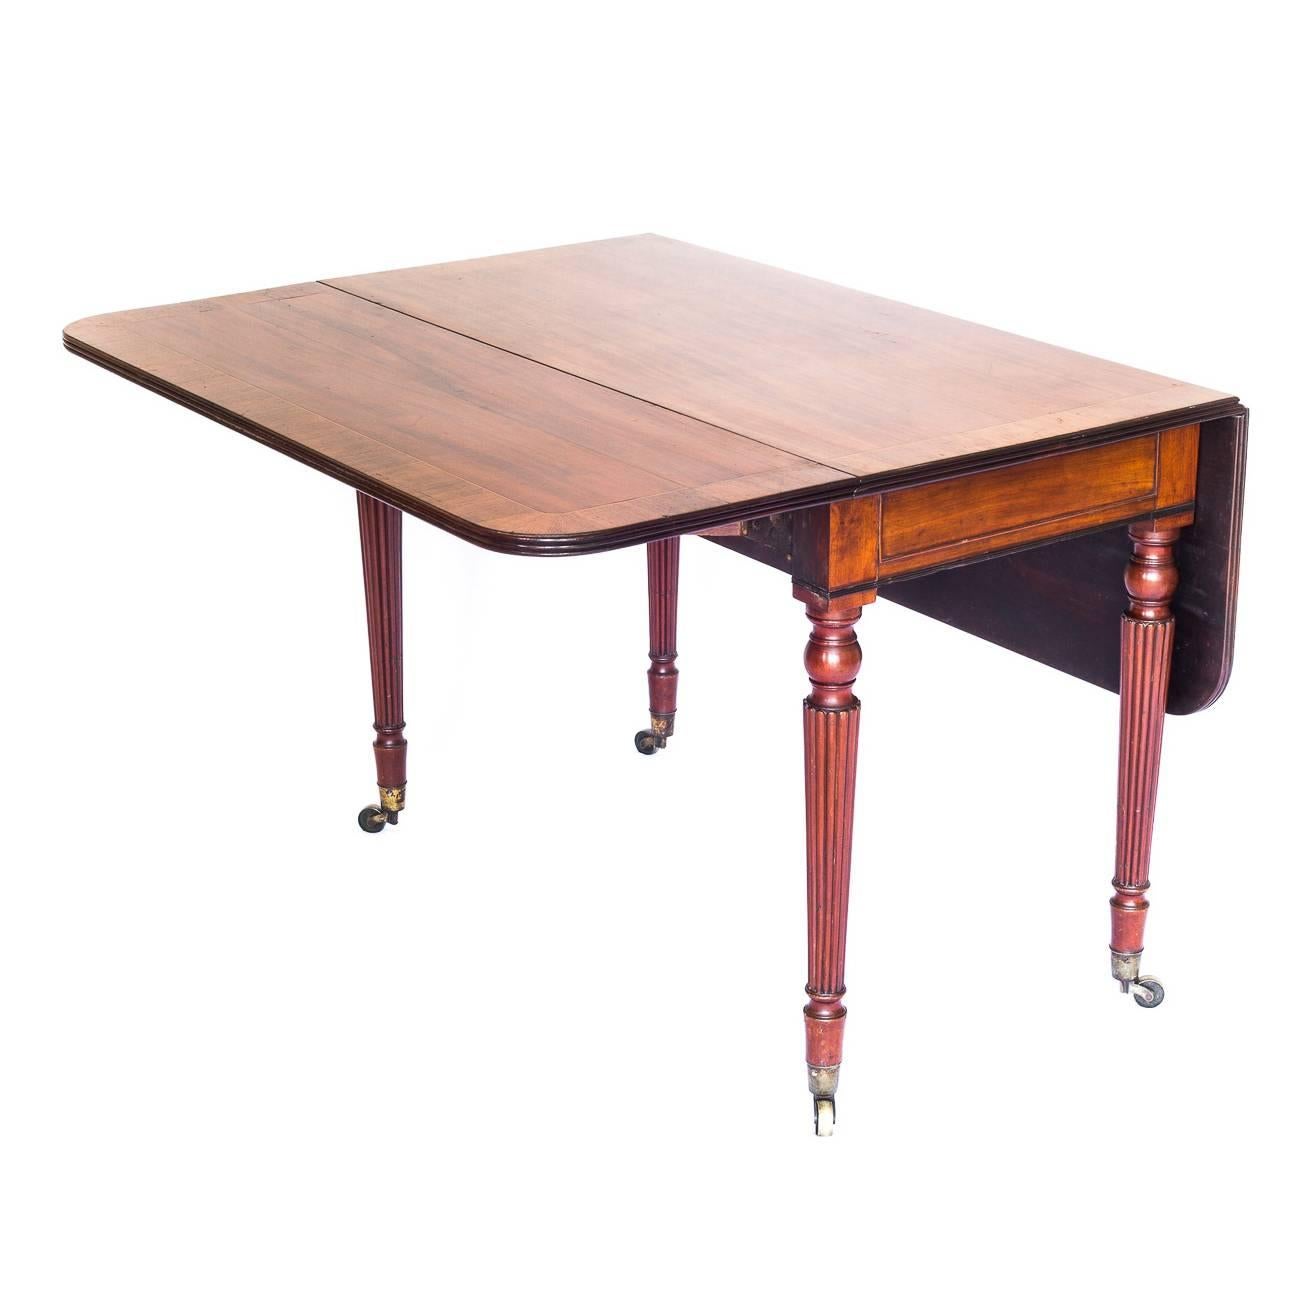 English Regency Mahogany and Rosewood Pembroke / Drop-Leaf Table of Gillows Style